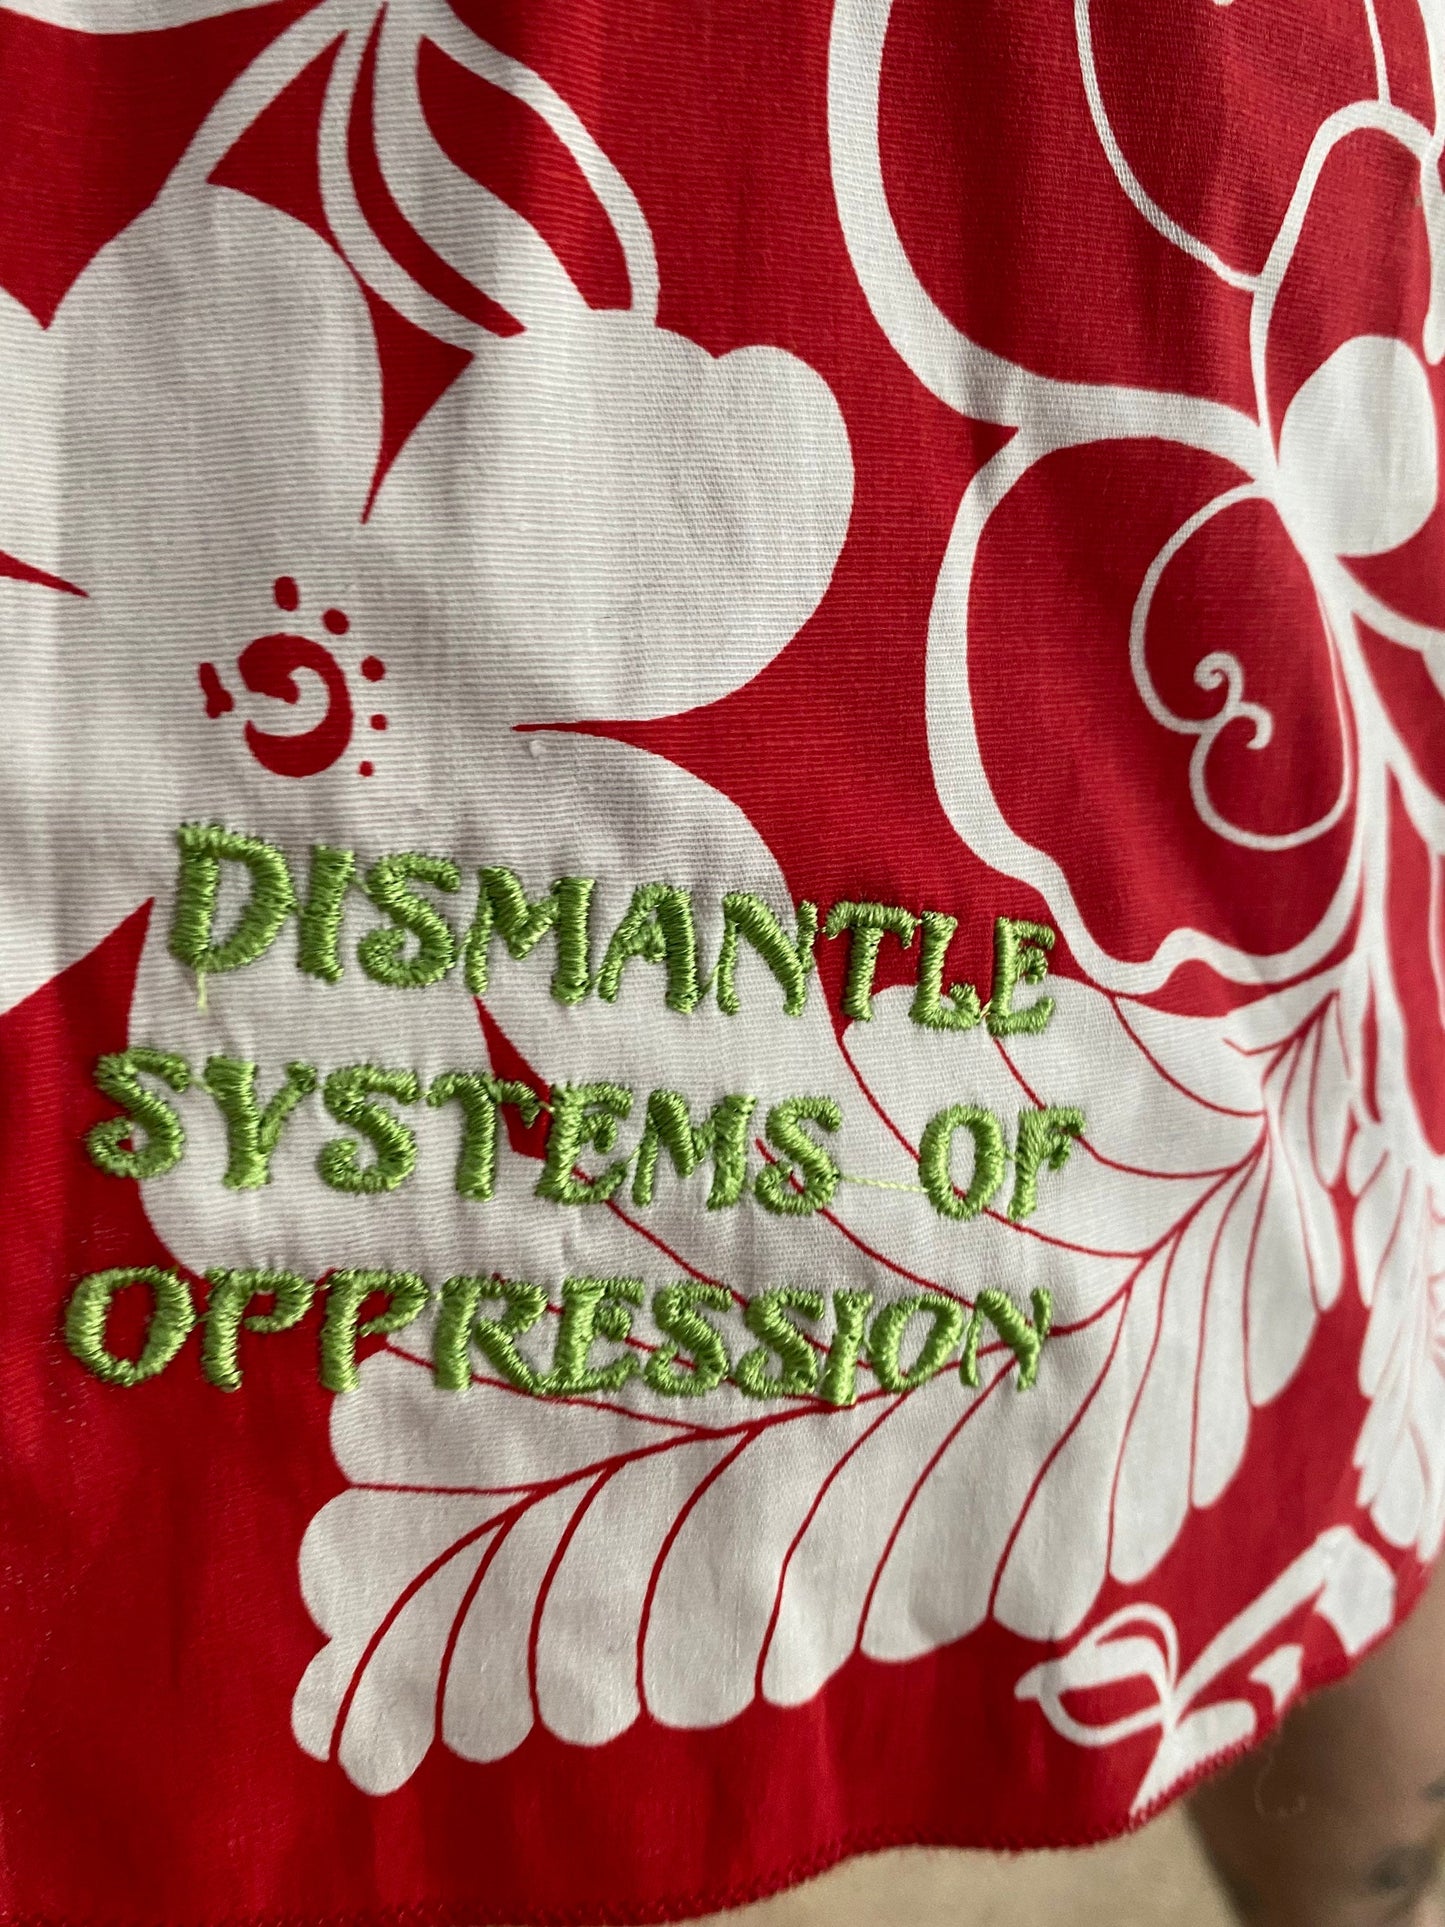 Dismantle Systems of Oppression Floral Dress